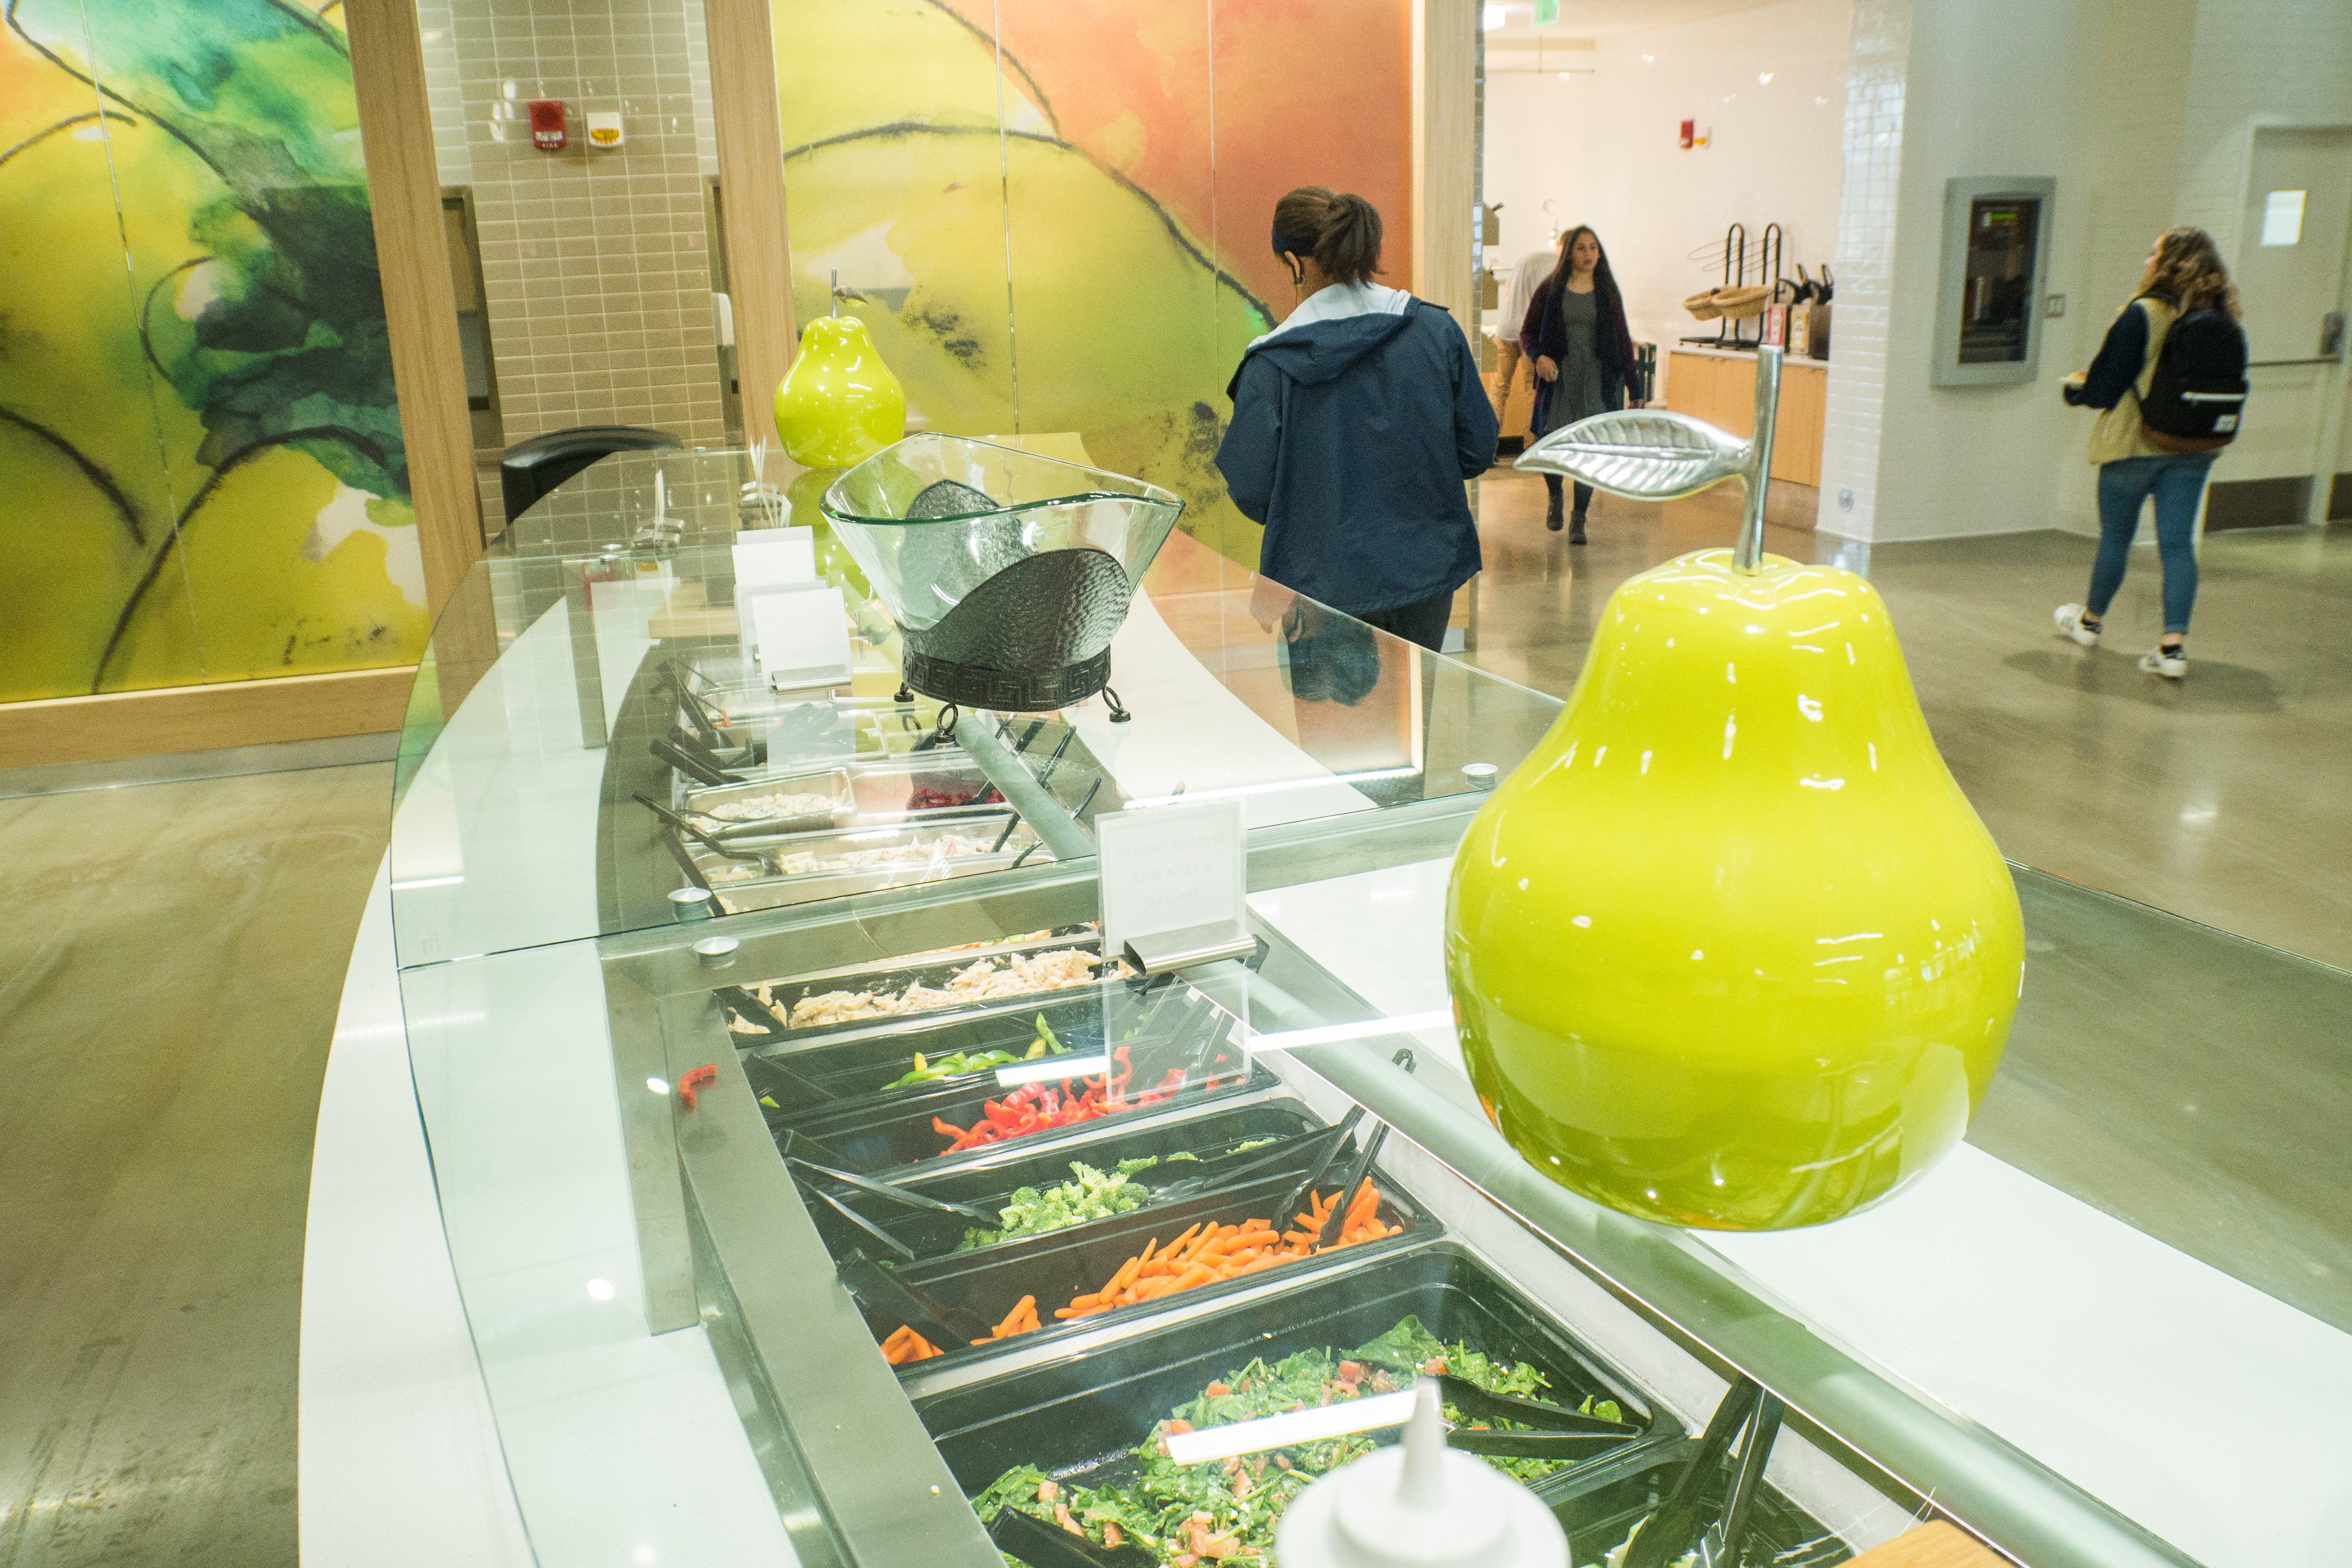 The newly renovated Putnam Refectory is one of eight UConn dining halls that have been certified as 'Green Restaurants' for practices that promote environmental sustainability. (Gail Merrill/UConn Photo)